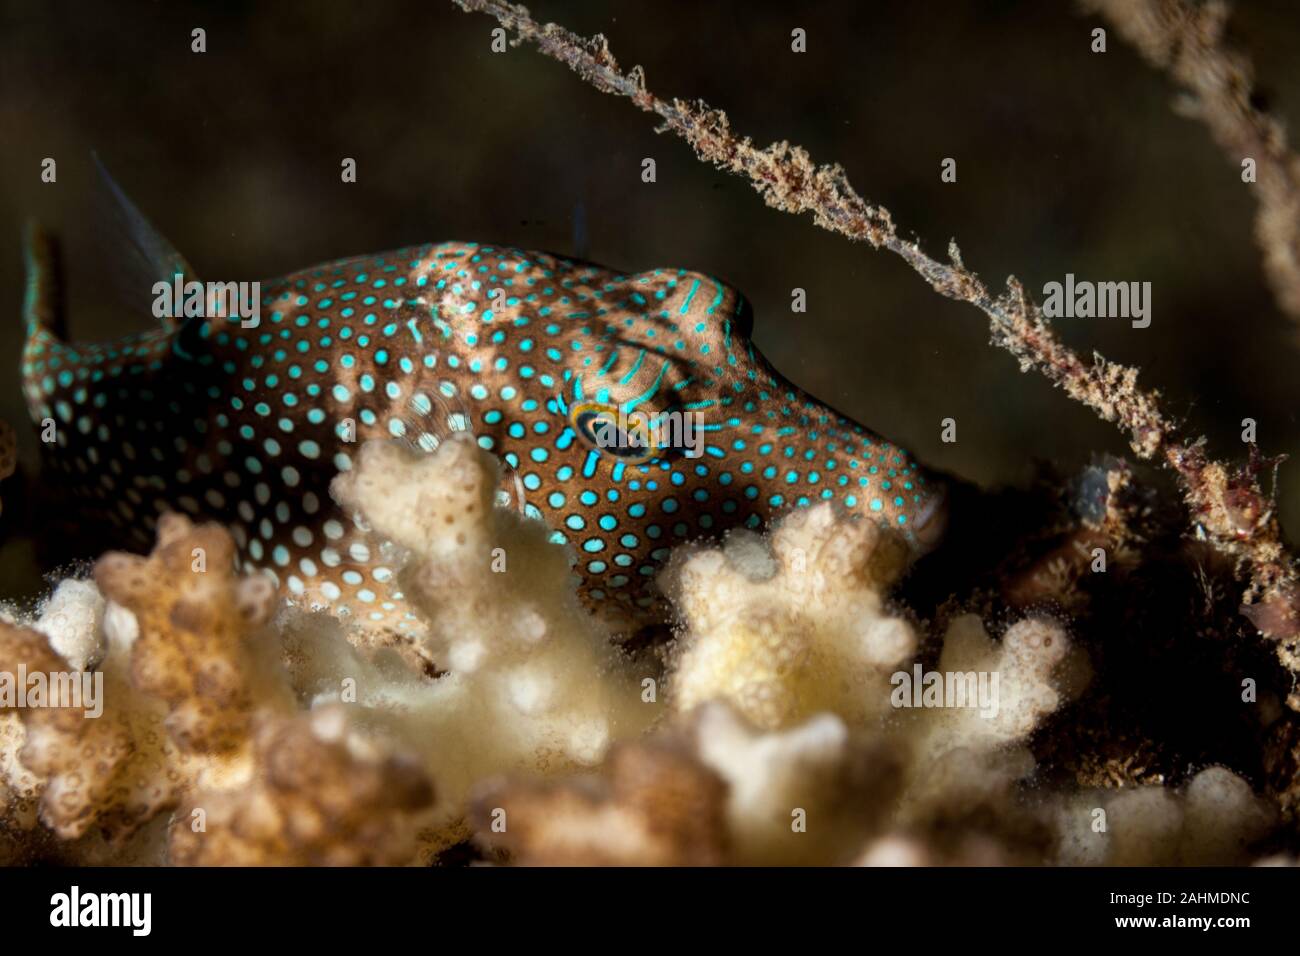 Canthigaster is a genus in the pufferfish family (Tetraodontidae) Stock Photo